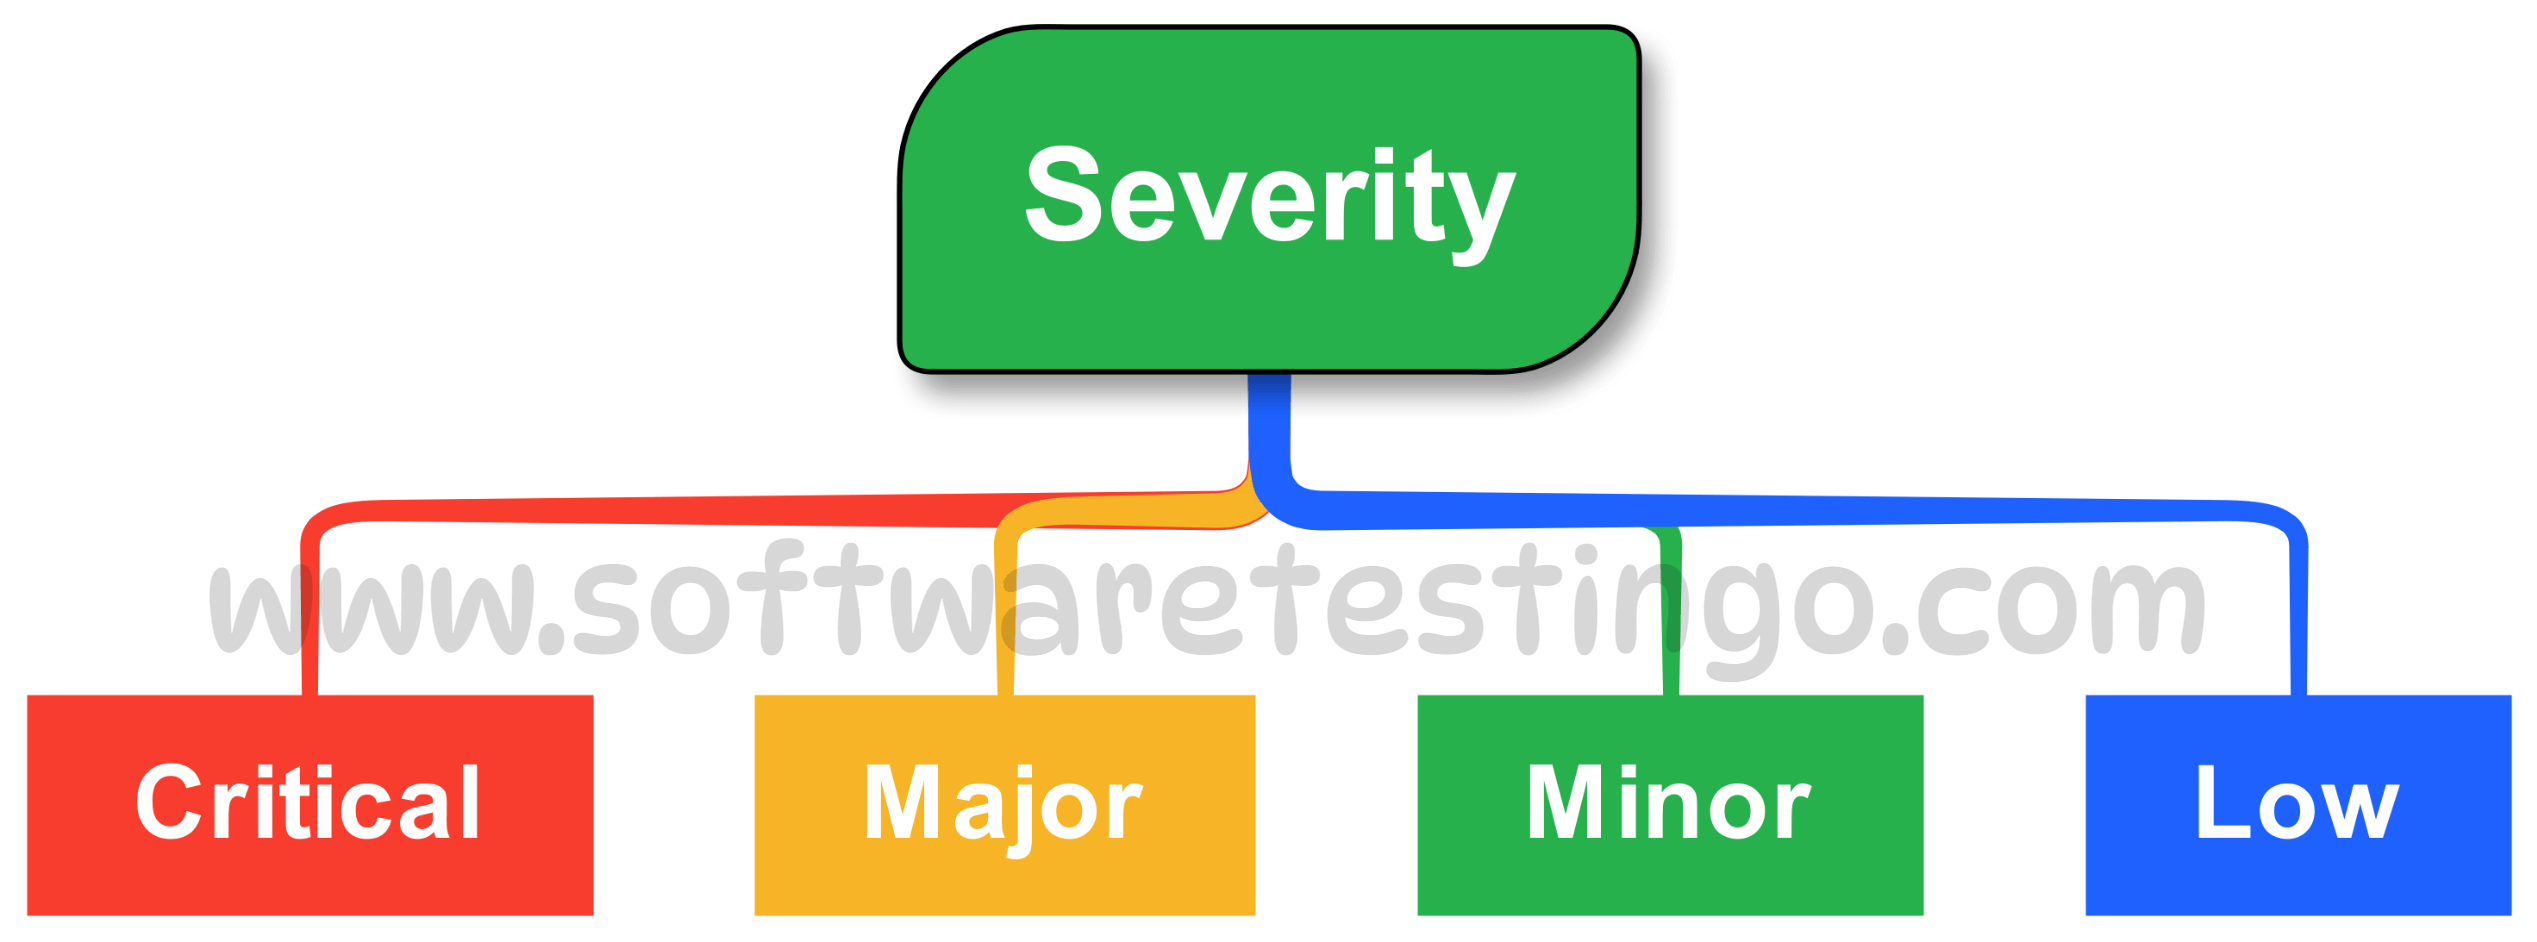 Types of Severity